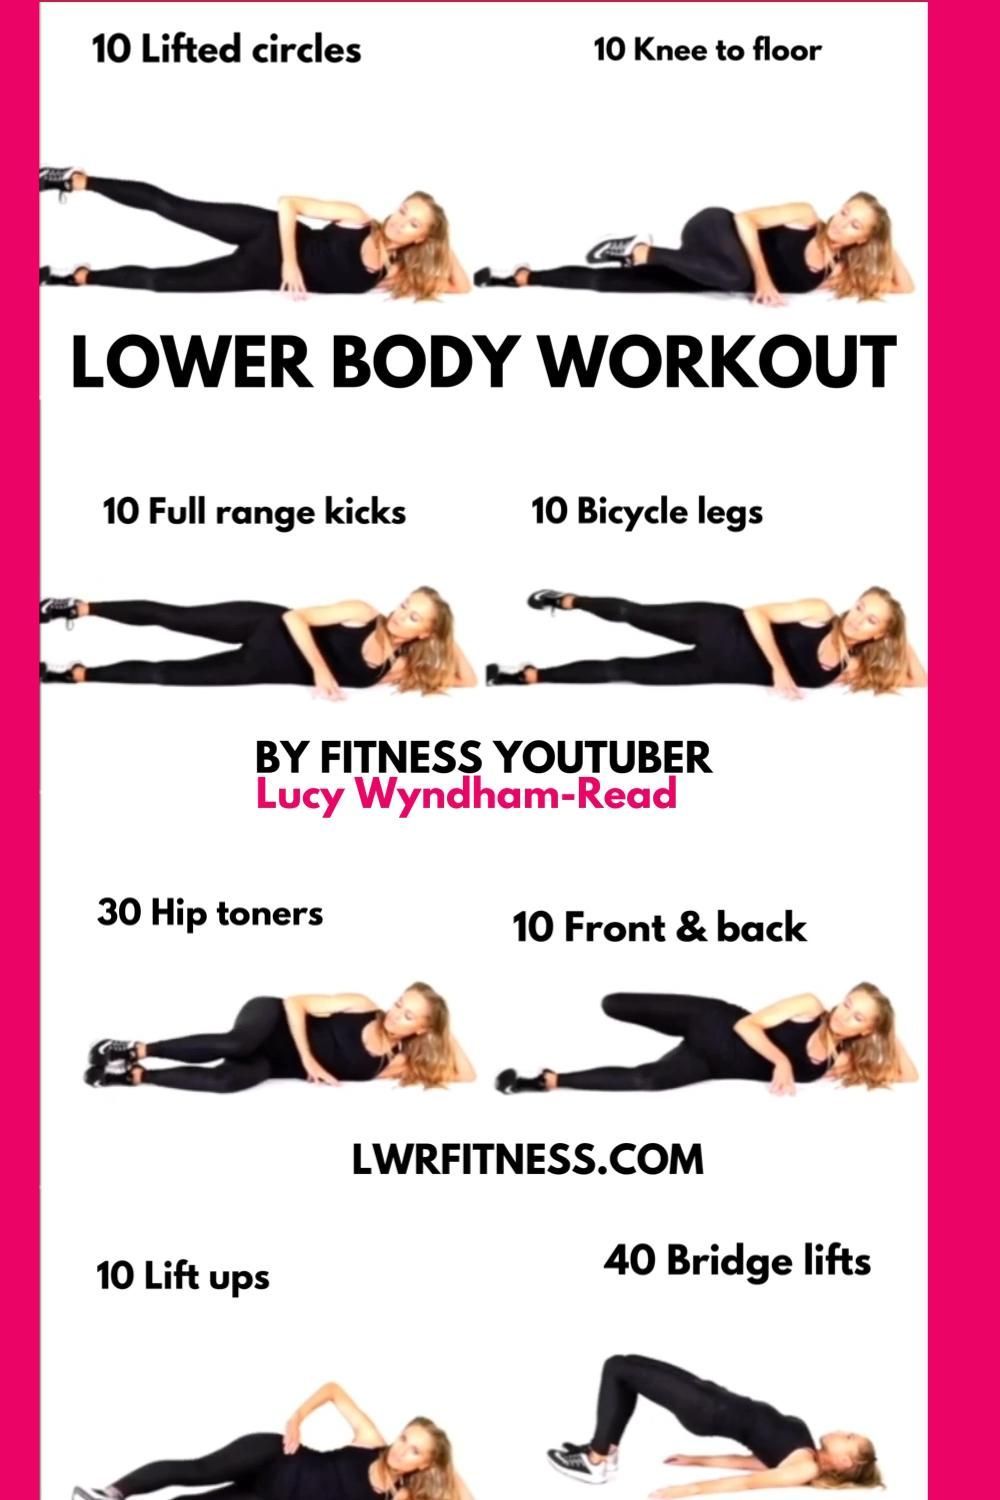 LOWER BODY WORKOUT AT HOME  - effective lower body exercises for legs and glutes at home. - LOWER BODY WORKOUT AT HOME  - effective lower body exercises for legs and glutes at home. -   19 fitness Routine motivation ideas